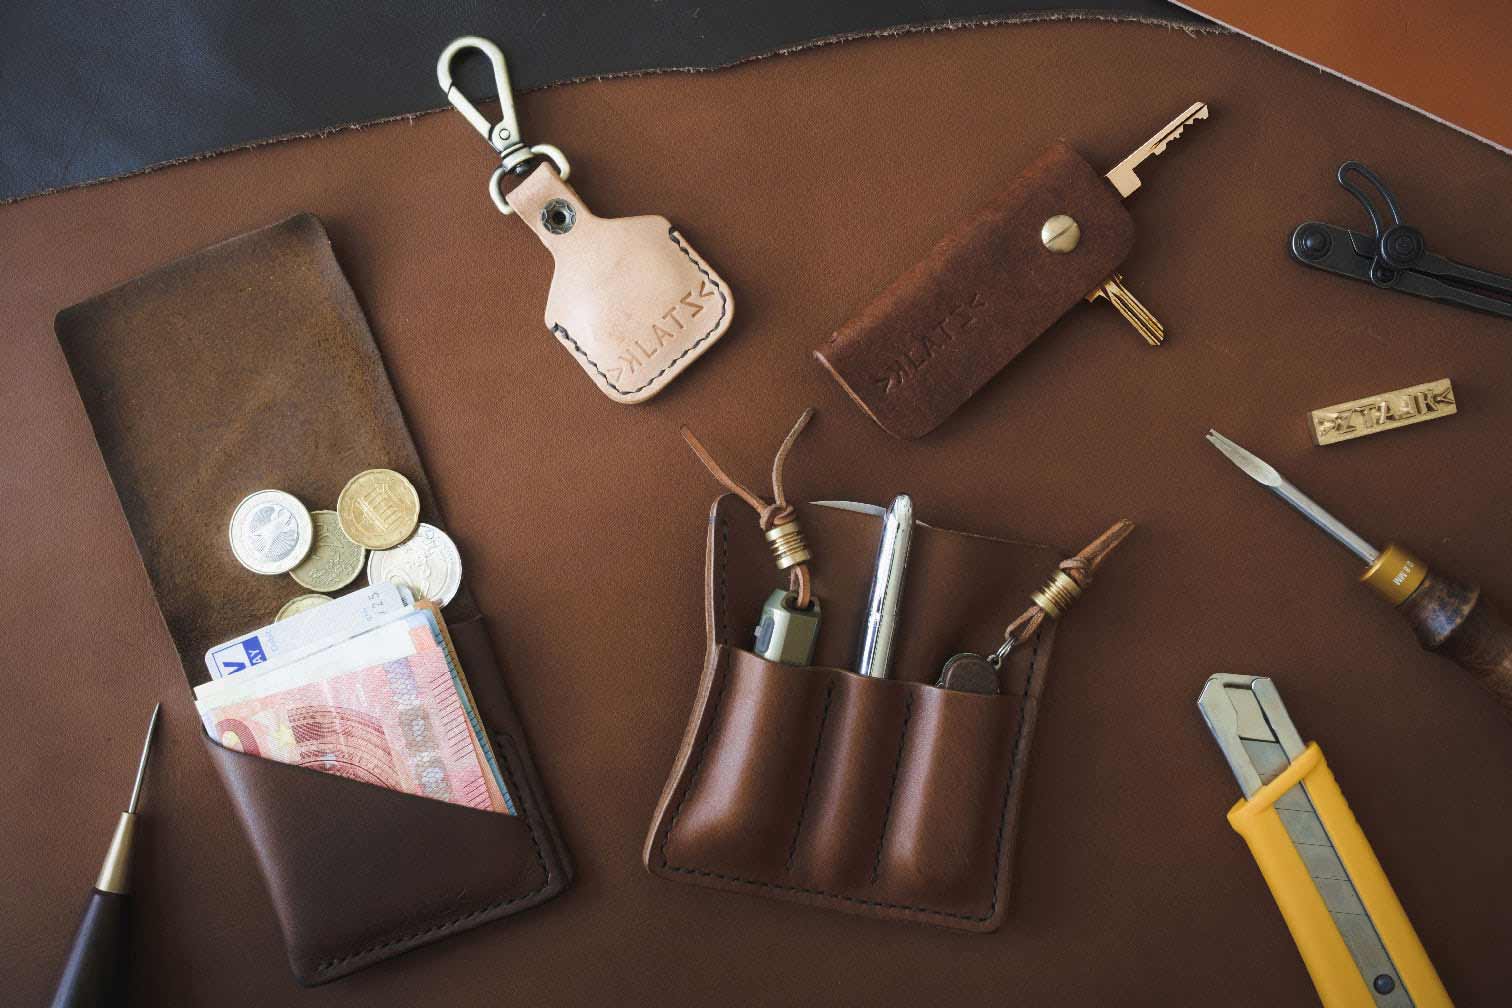 Leather goods I have made